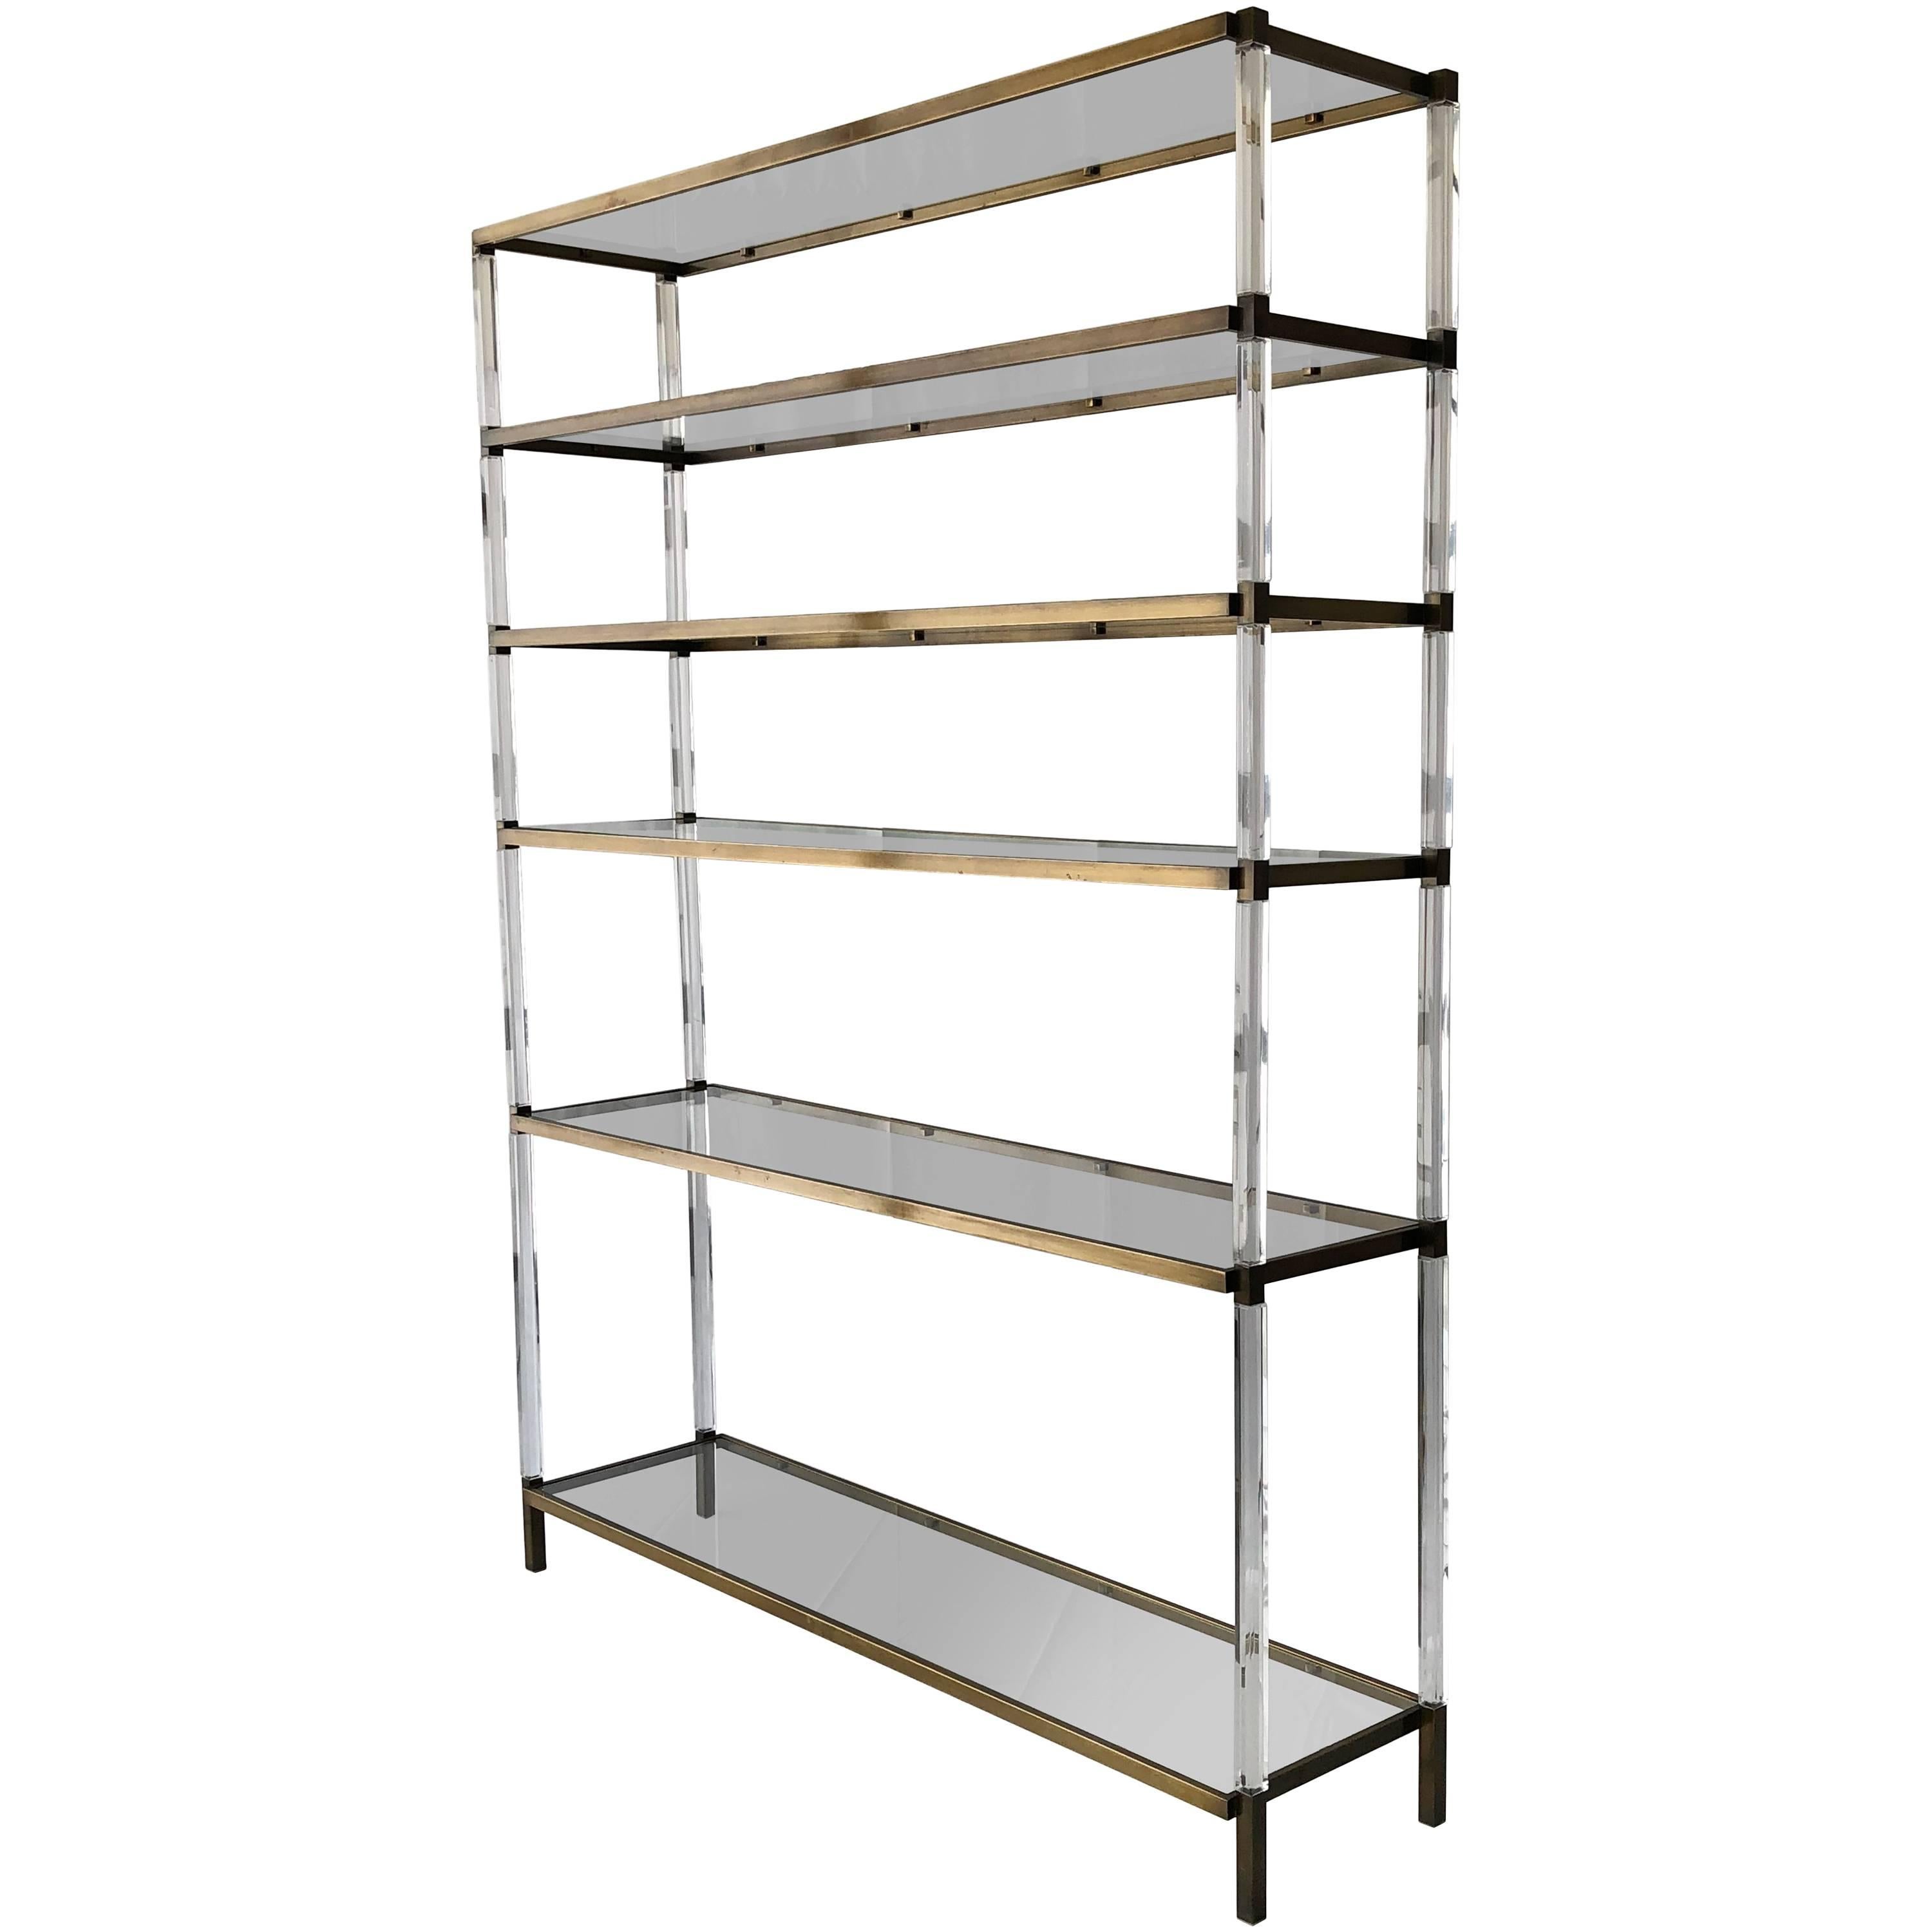 Charles Hollis Jones Custom "Metric" Étagère/Shelving Unit in Lucite and Brass For Sale